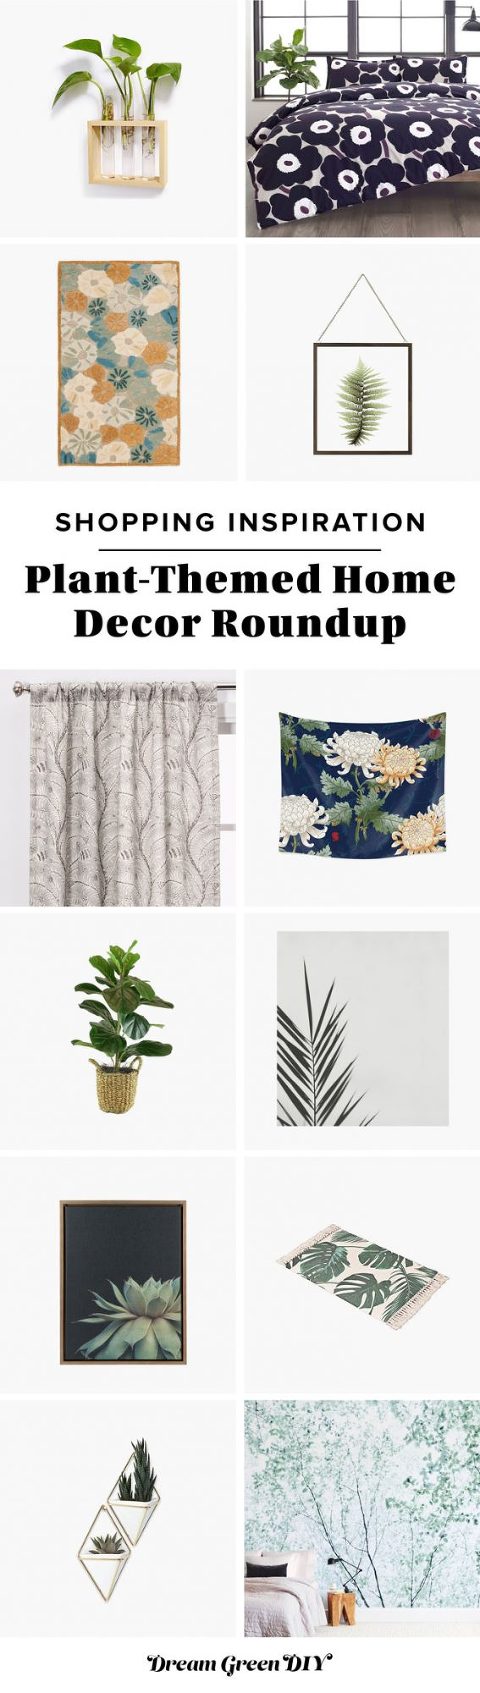 Plant-Themed Home Decor Roundup